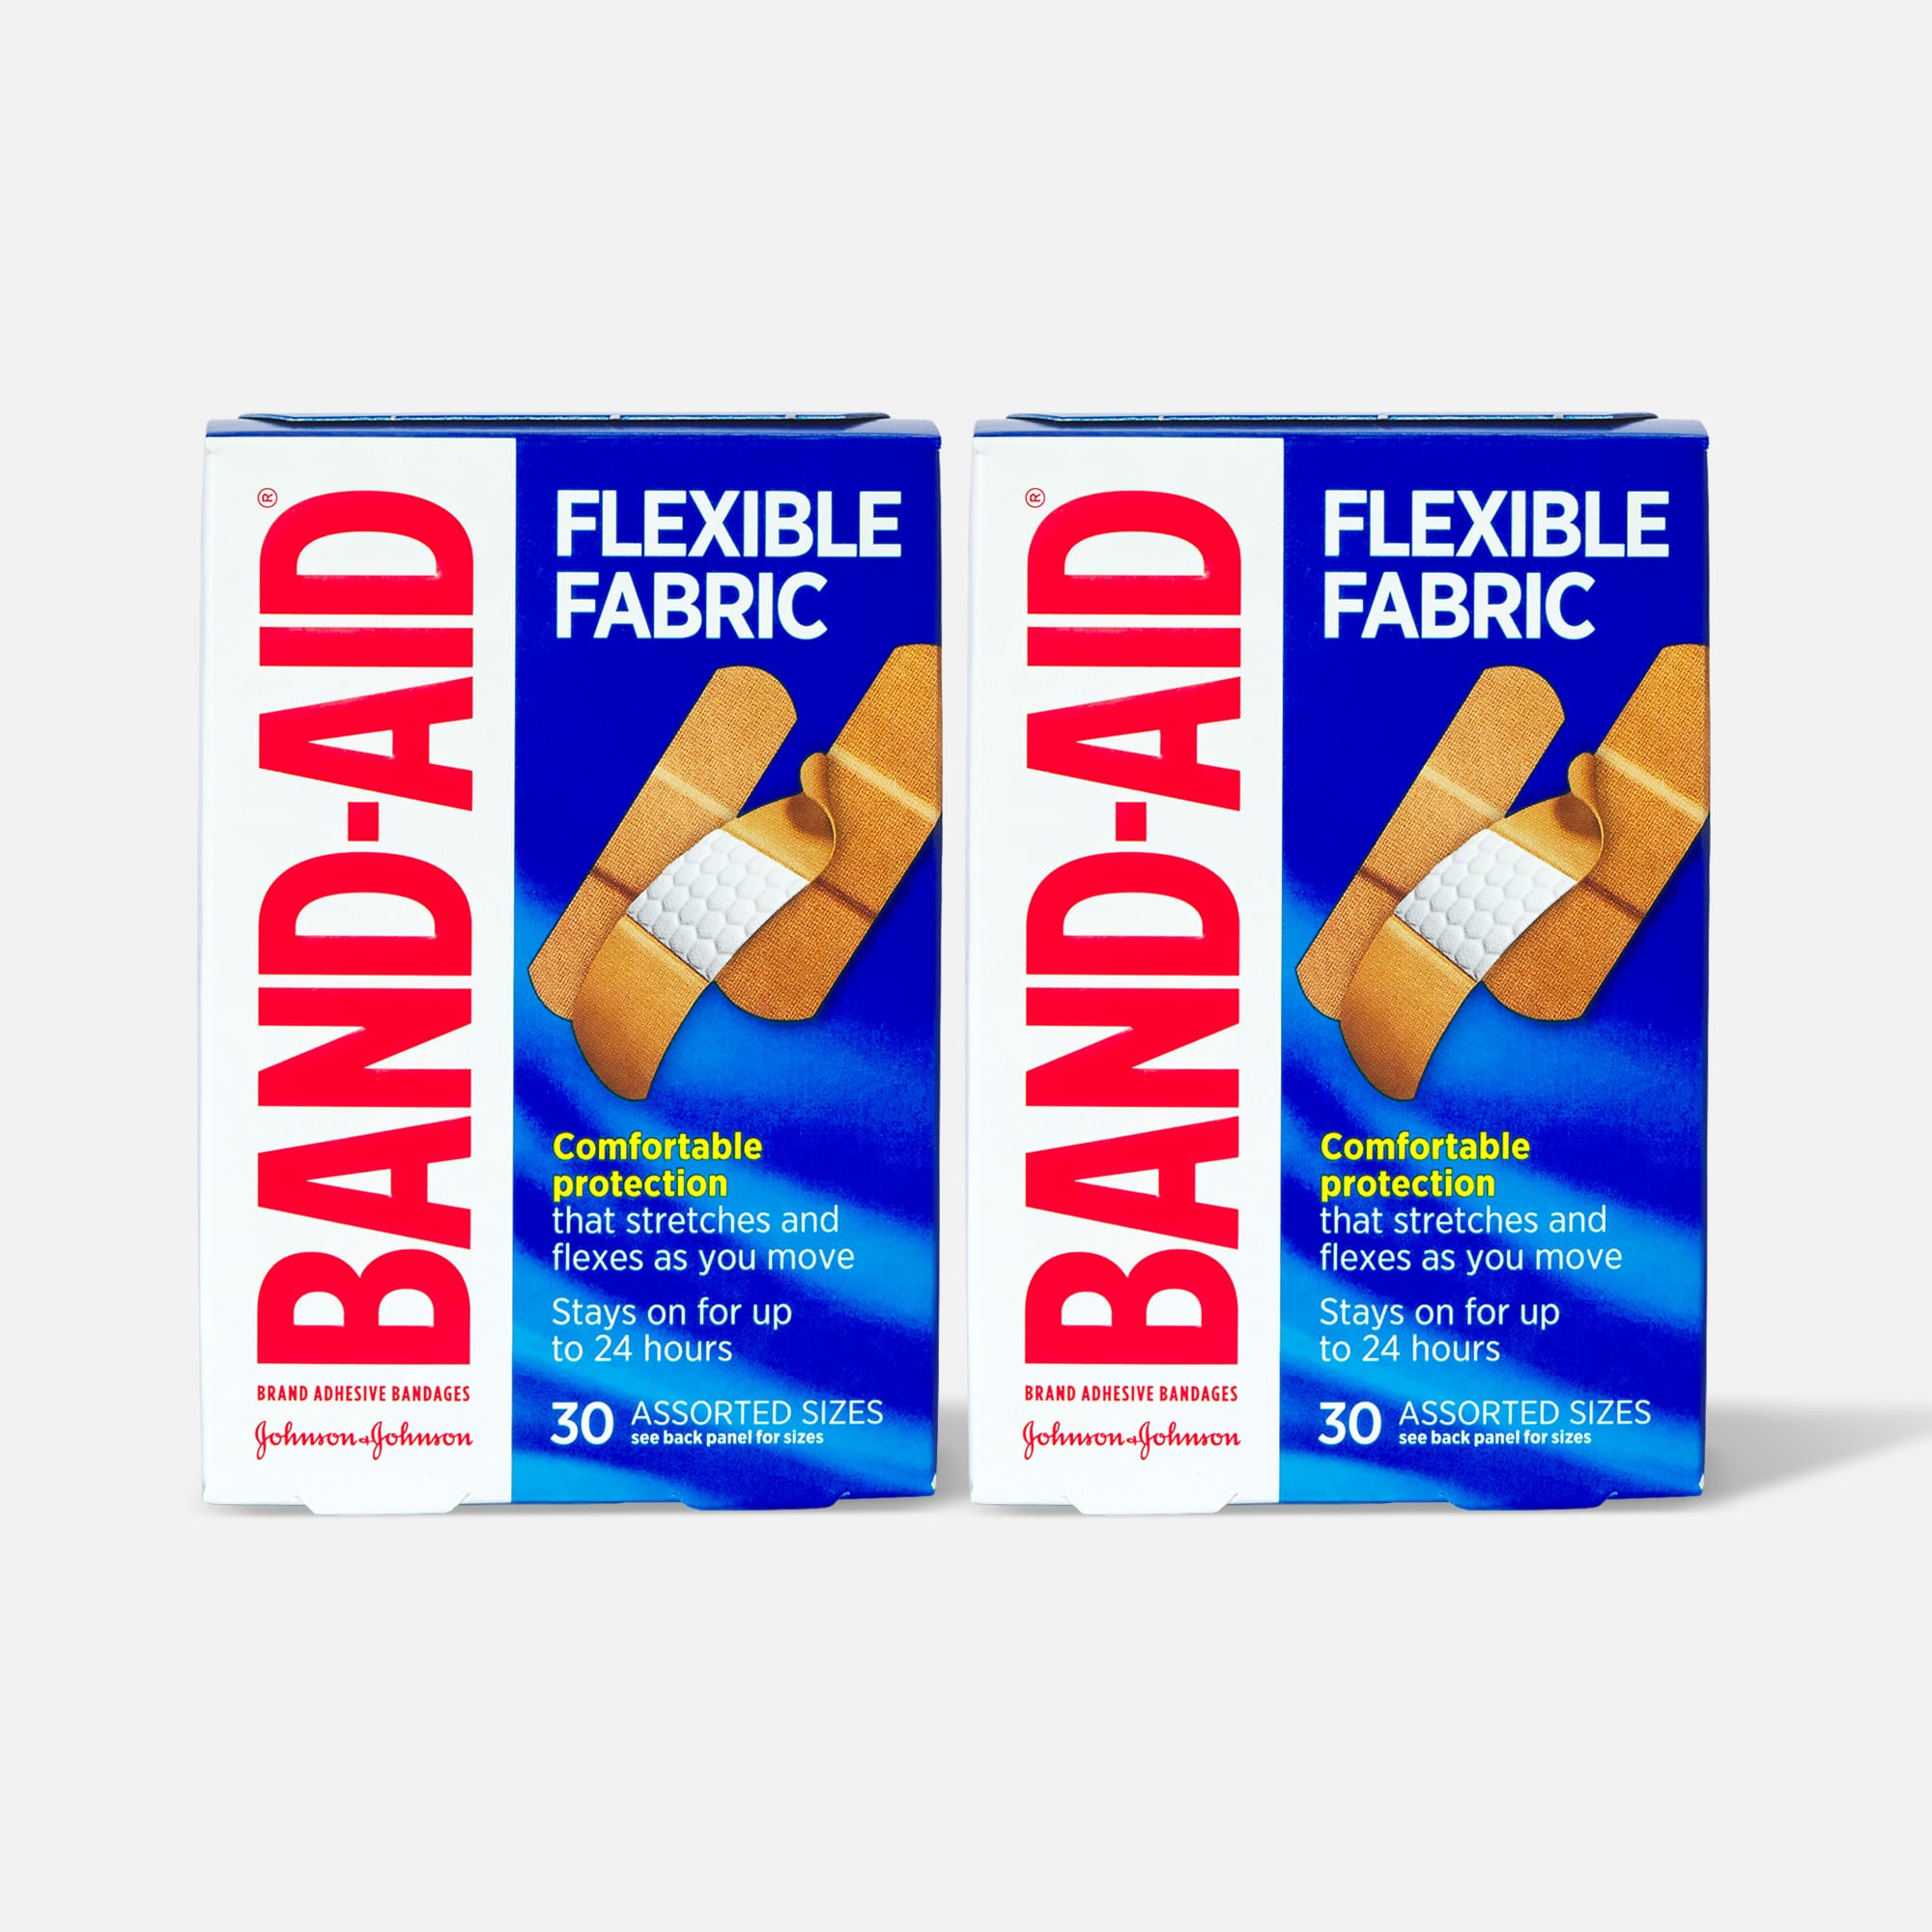 HSA Eligible  Band-Aid Flexible Fabric Adhesive Bandages, Assorted, 30 ct.  (2-Pack)